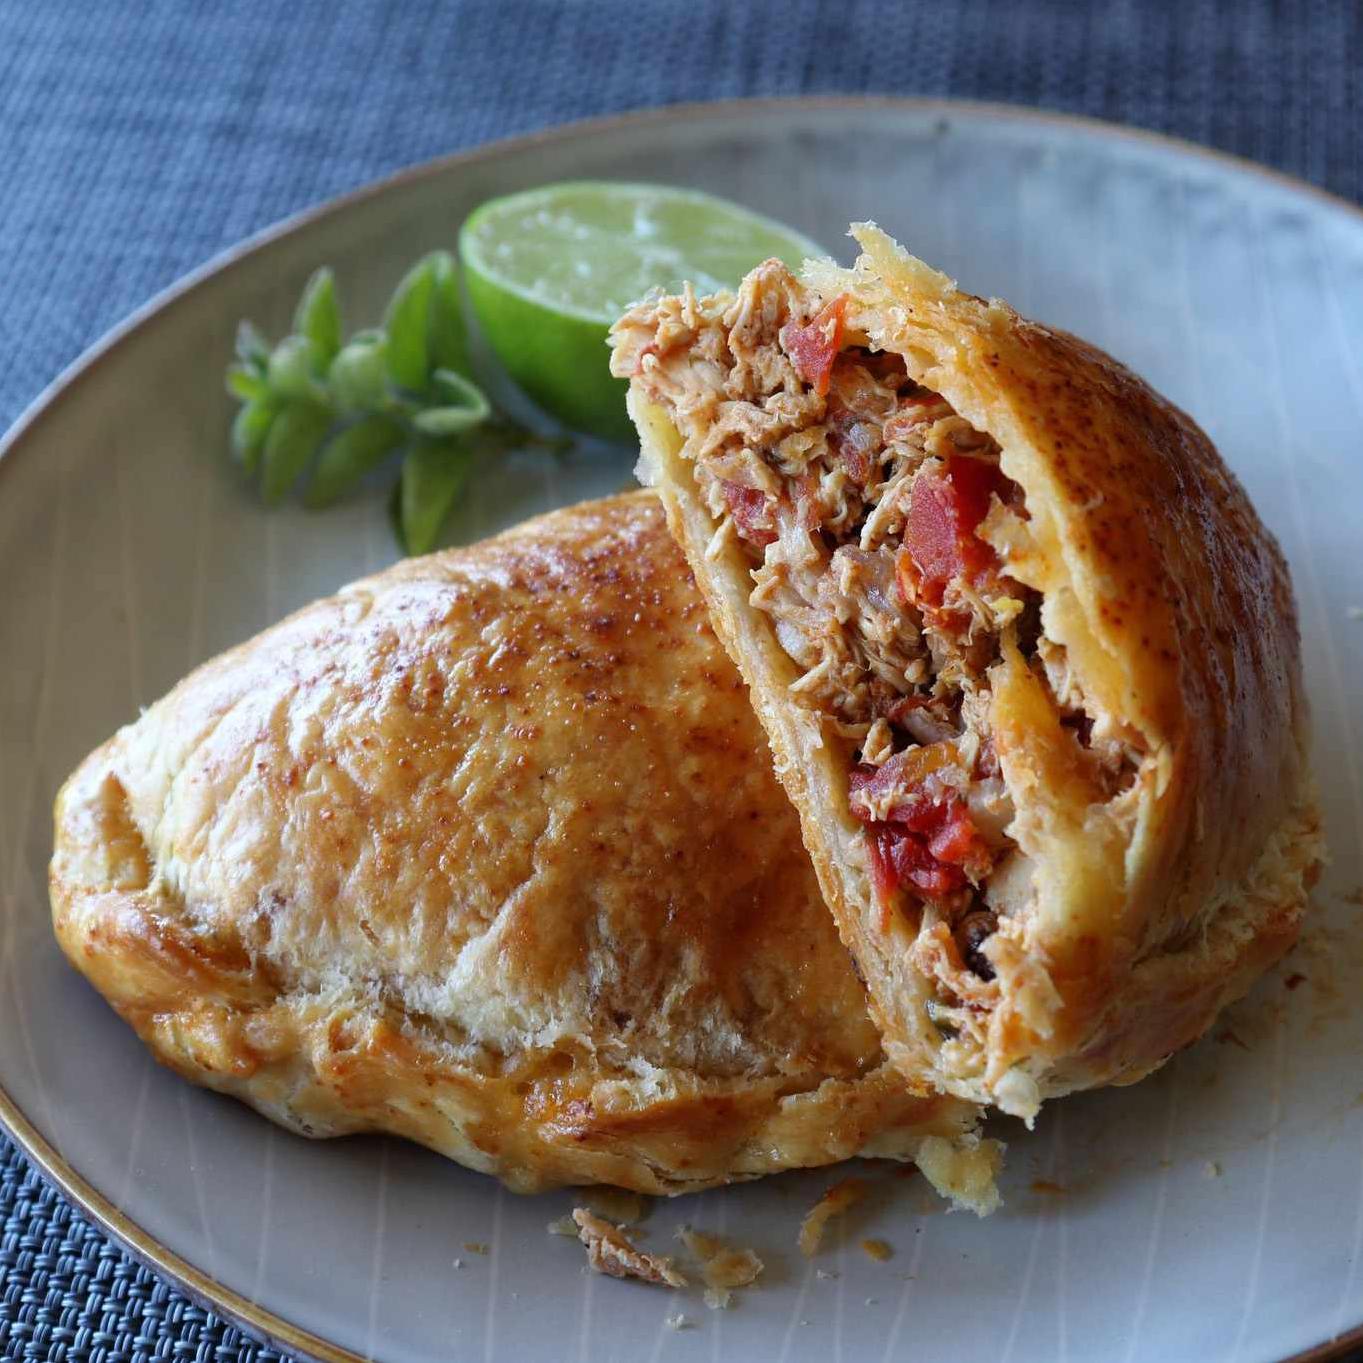  Sink your teeth into the crispy, golden-brown crust of these delicious chicken empanadas.